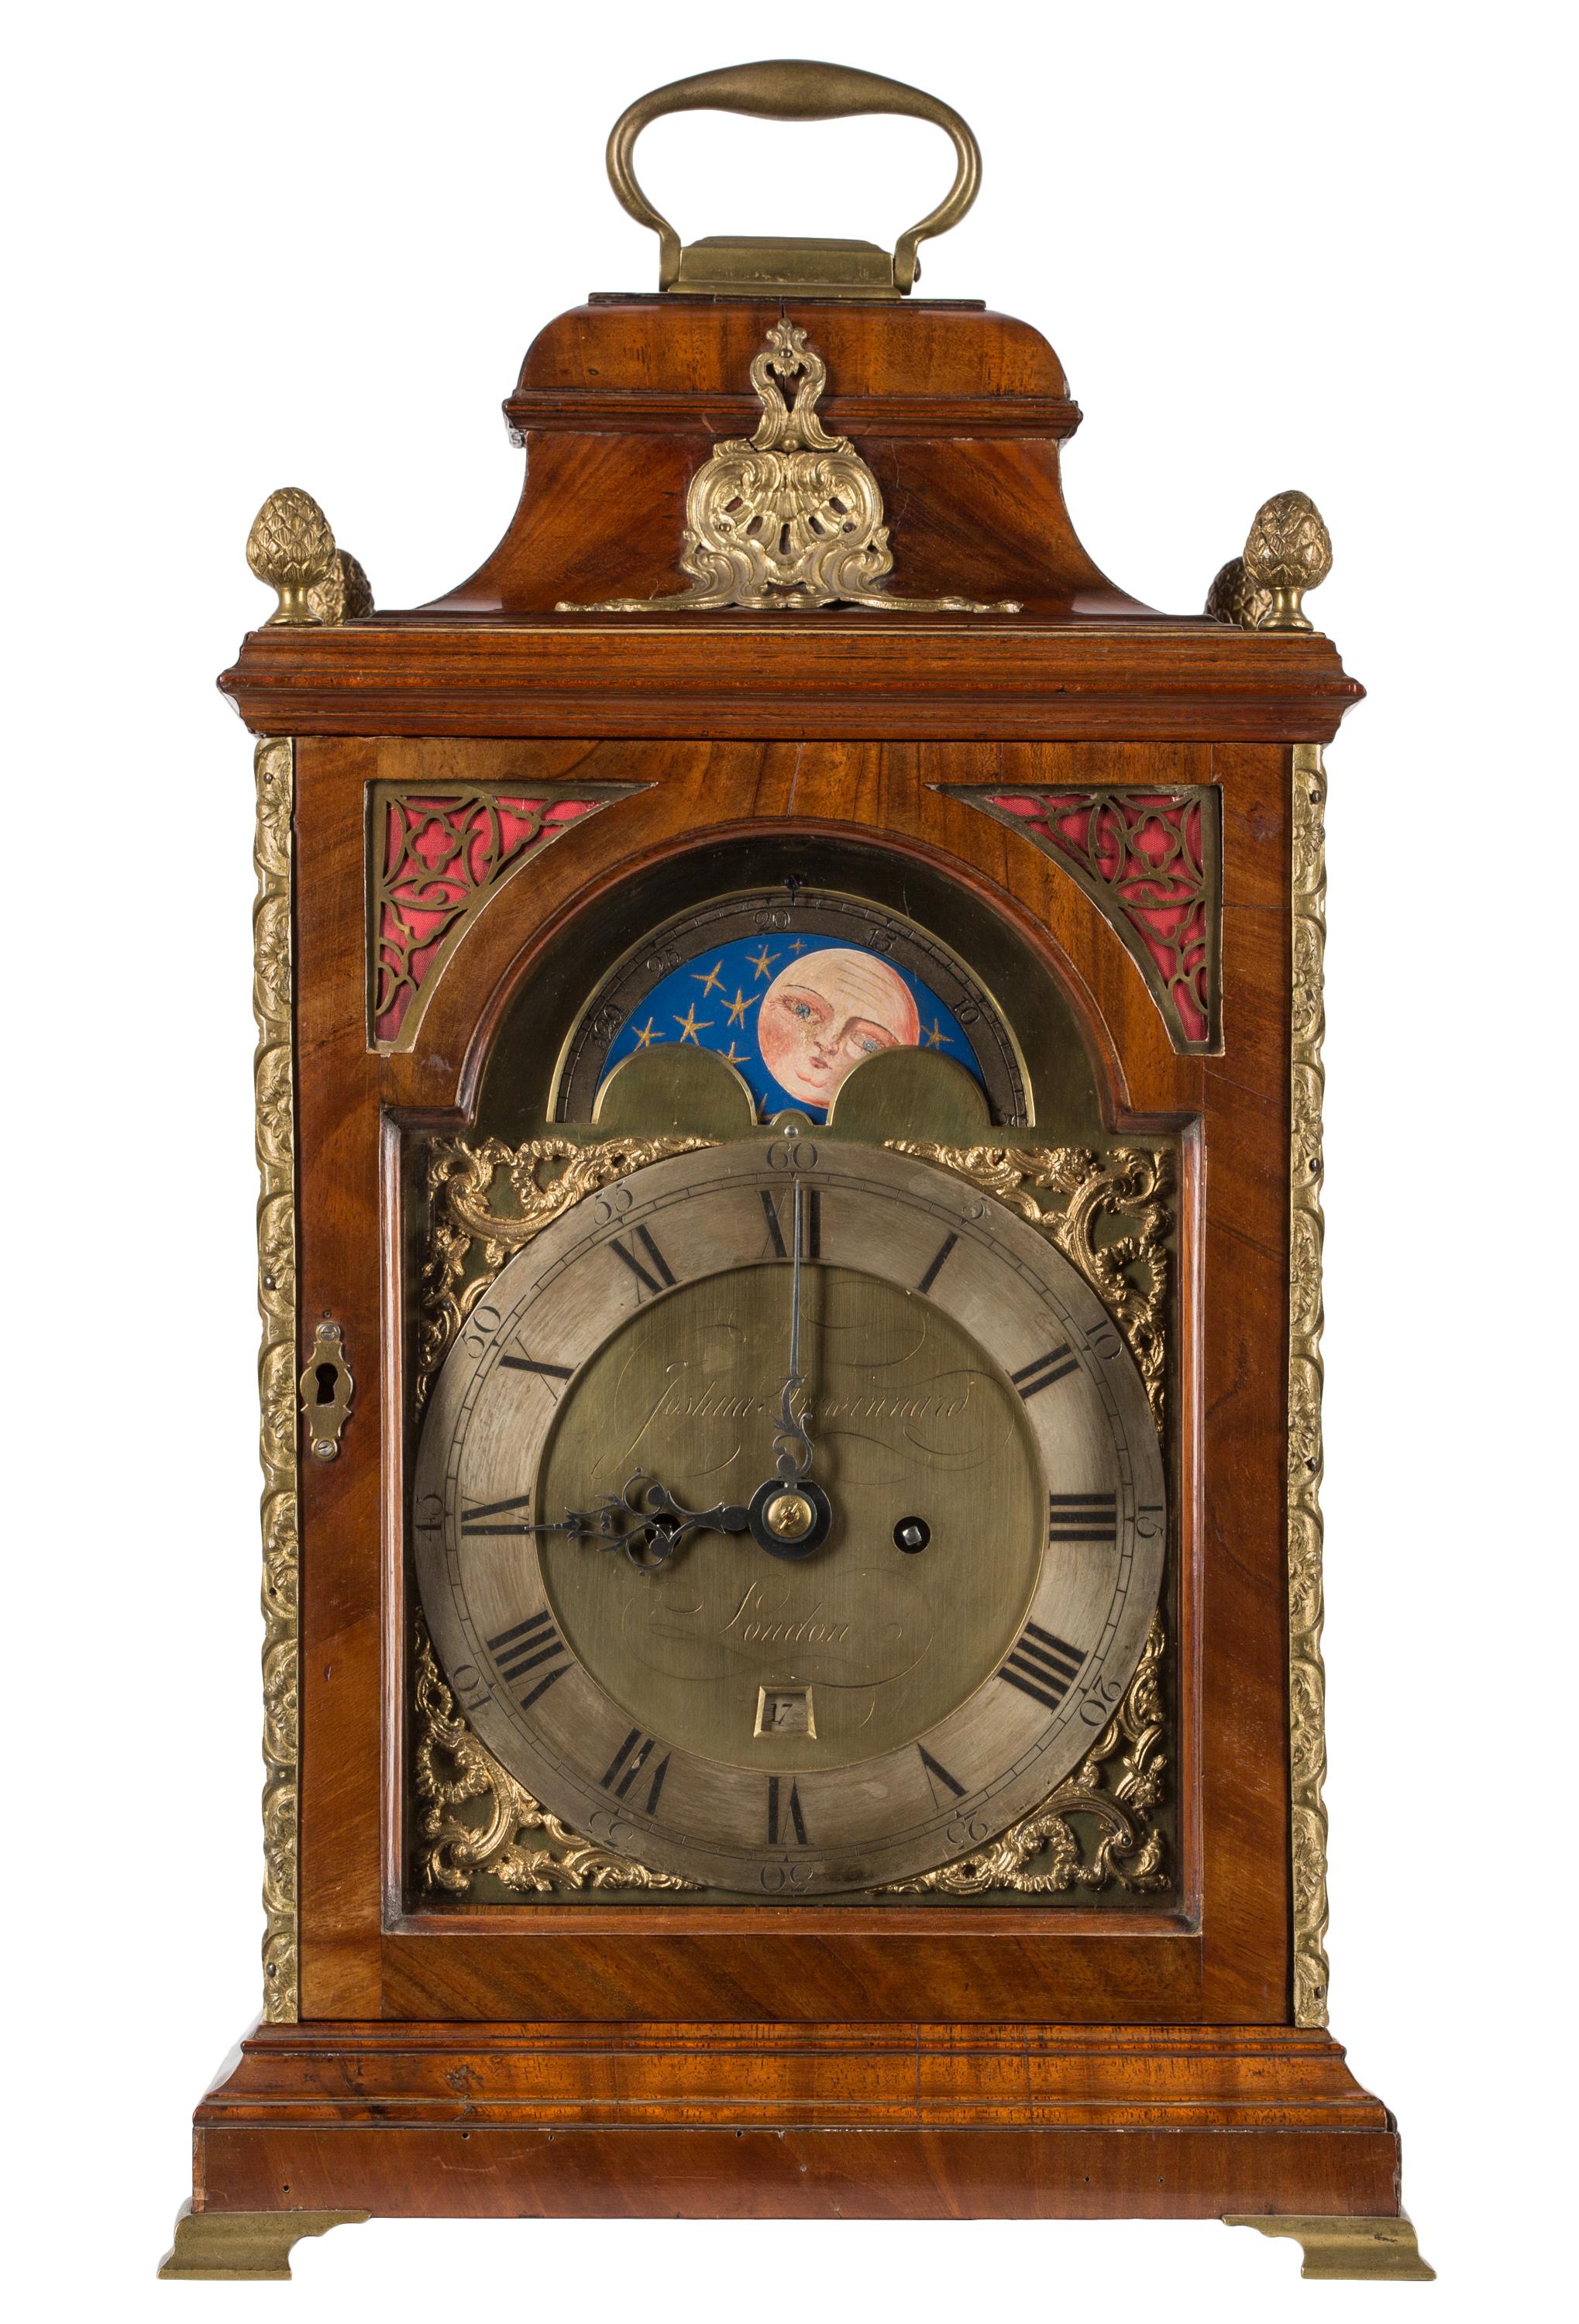 This is a fully-functioning late 18th century English bracket clock by Joshua Trewinnard of London. The moon phase dial was useful in the past for both farmers who would schedule the planting of certain crops in relation to the phase of the moon,